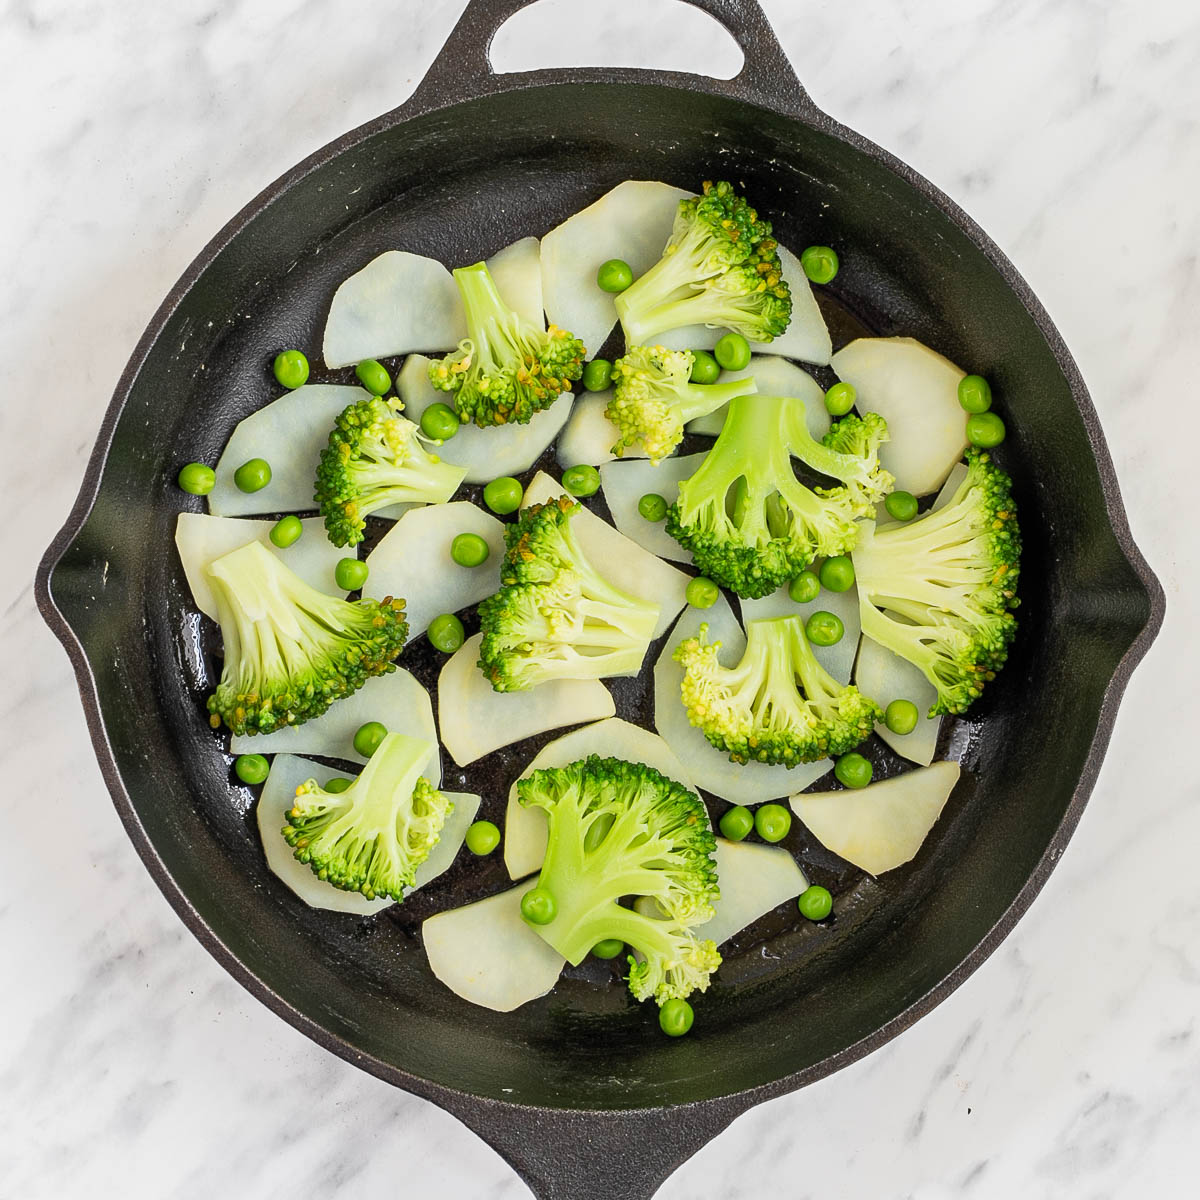 Black cast iron skillet with potato slices, broccoli, and green peas.